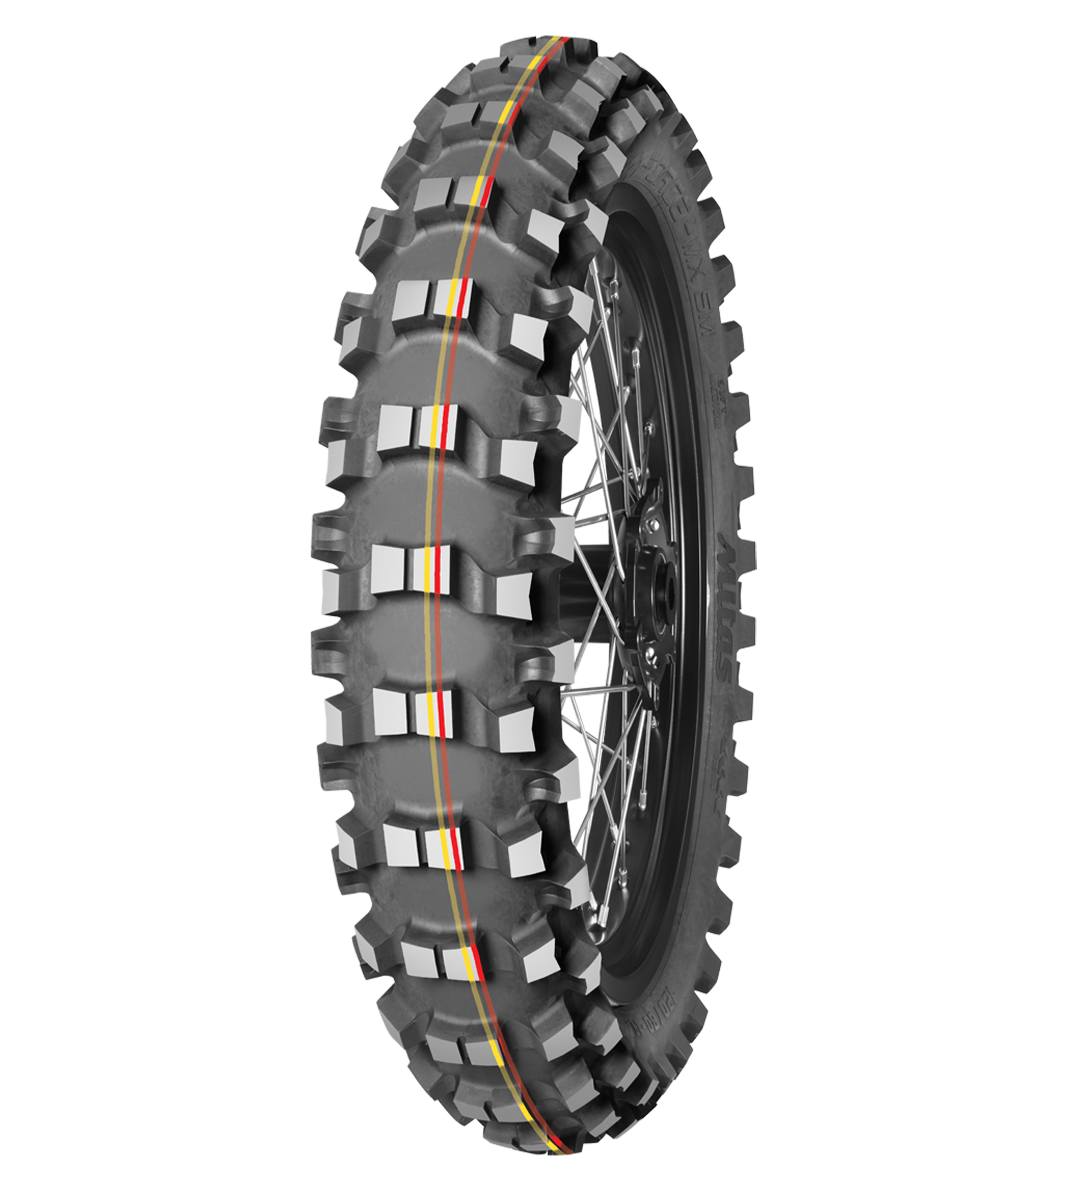 Mitas TERRA FORCE-MX SM 120/80-19 Motocross Competition Off-Road SOFT TO MEDIUM 63M Red &amp; Yellow Tube Rear Tire, 226519, 120/80-19, Motocross, Motocross Competition, Off-Road, Rear, Terra Force, Terra Force-MX SM, Trail, Tires - Imported and distributed in North &amp; South America by Lindeco Genuine Powersports - Premier Powersports Equipment and Accessories for Motorcycle Enthusiasts, Professional Riders and Dealers.